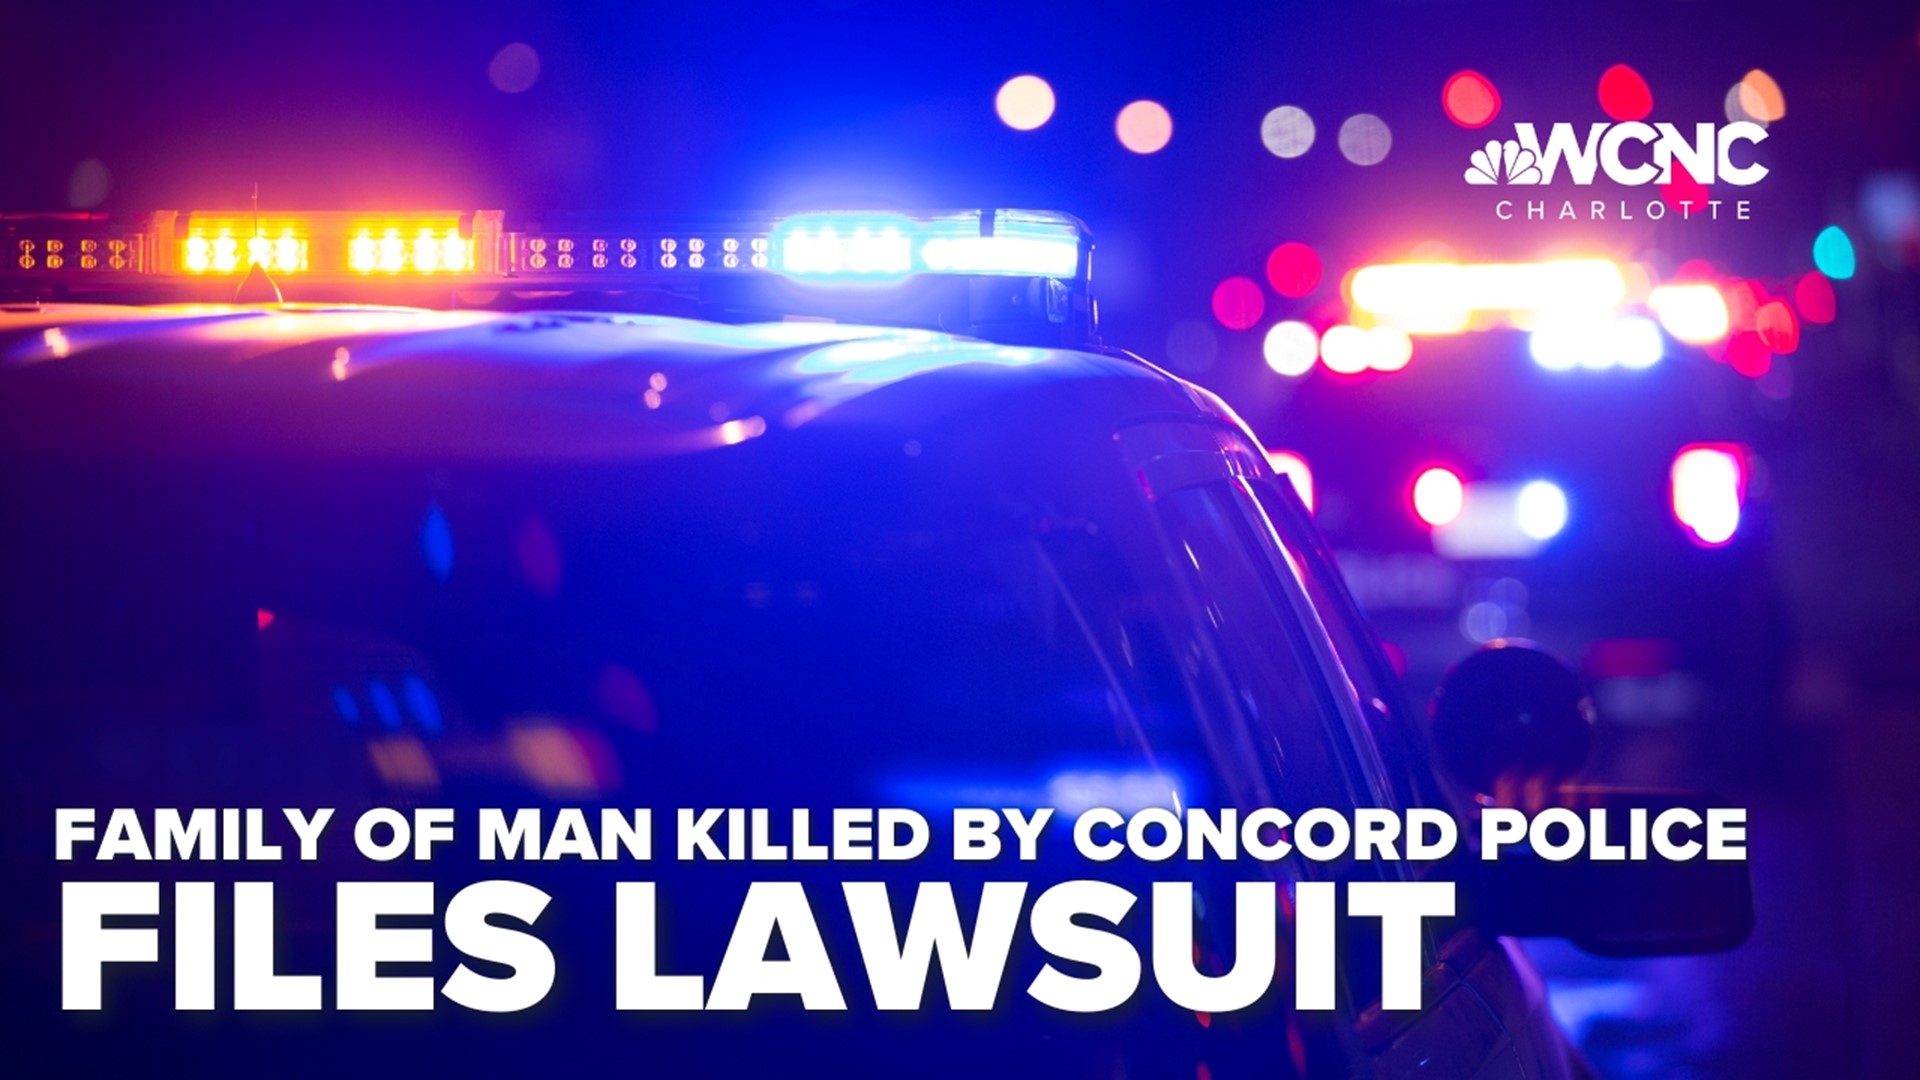 The family of a man shot and killed by Concord police is suing the officer who shot him and the city of Concord.